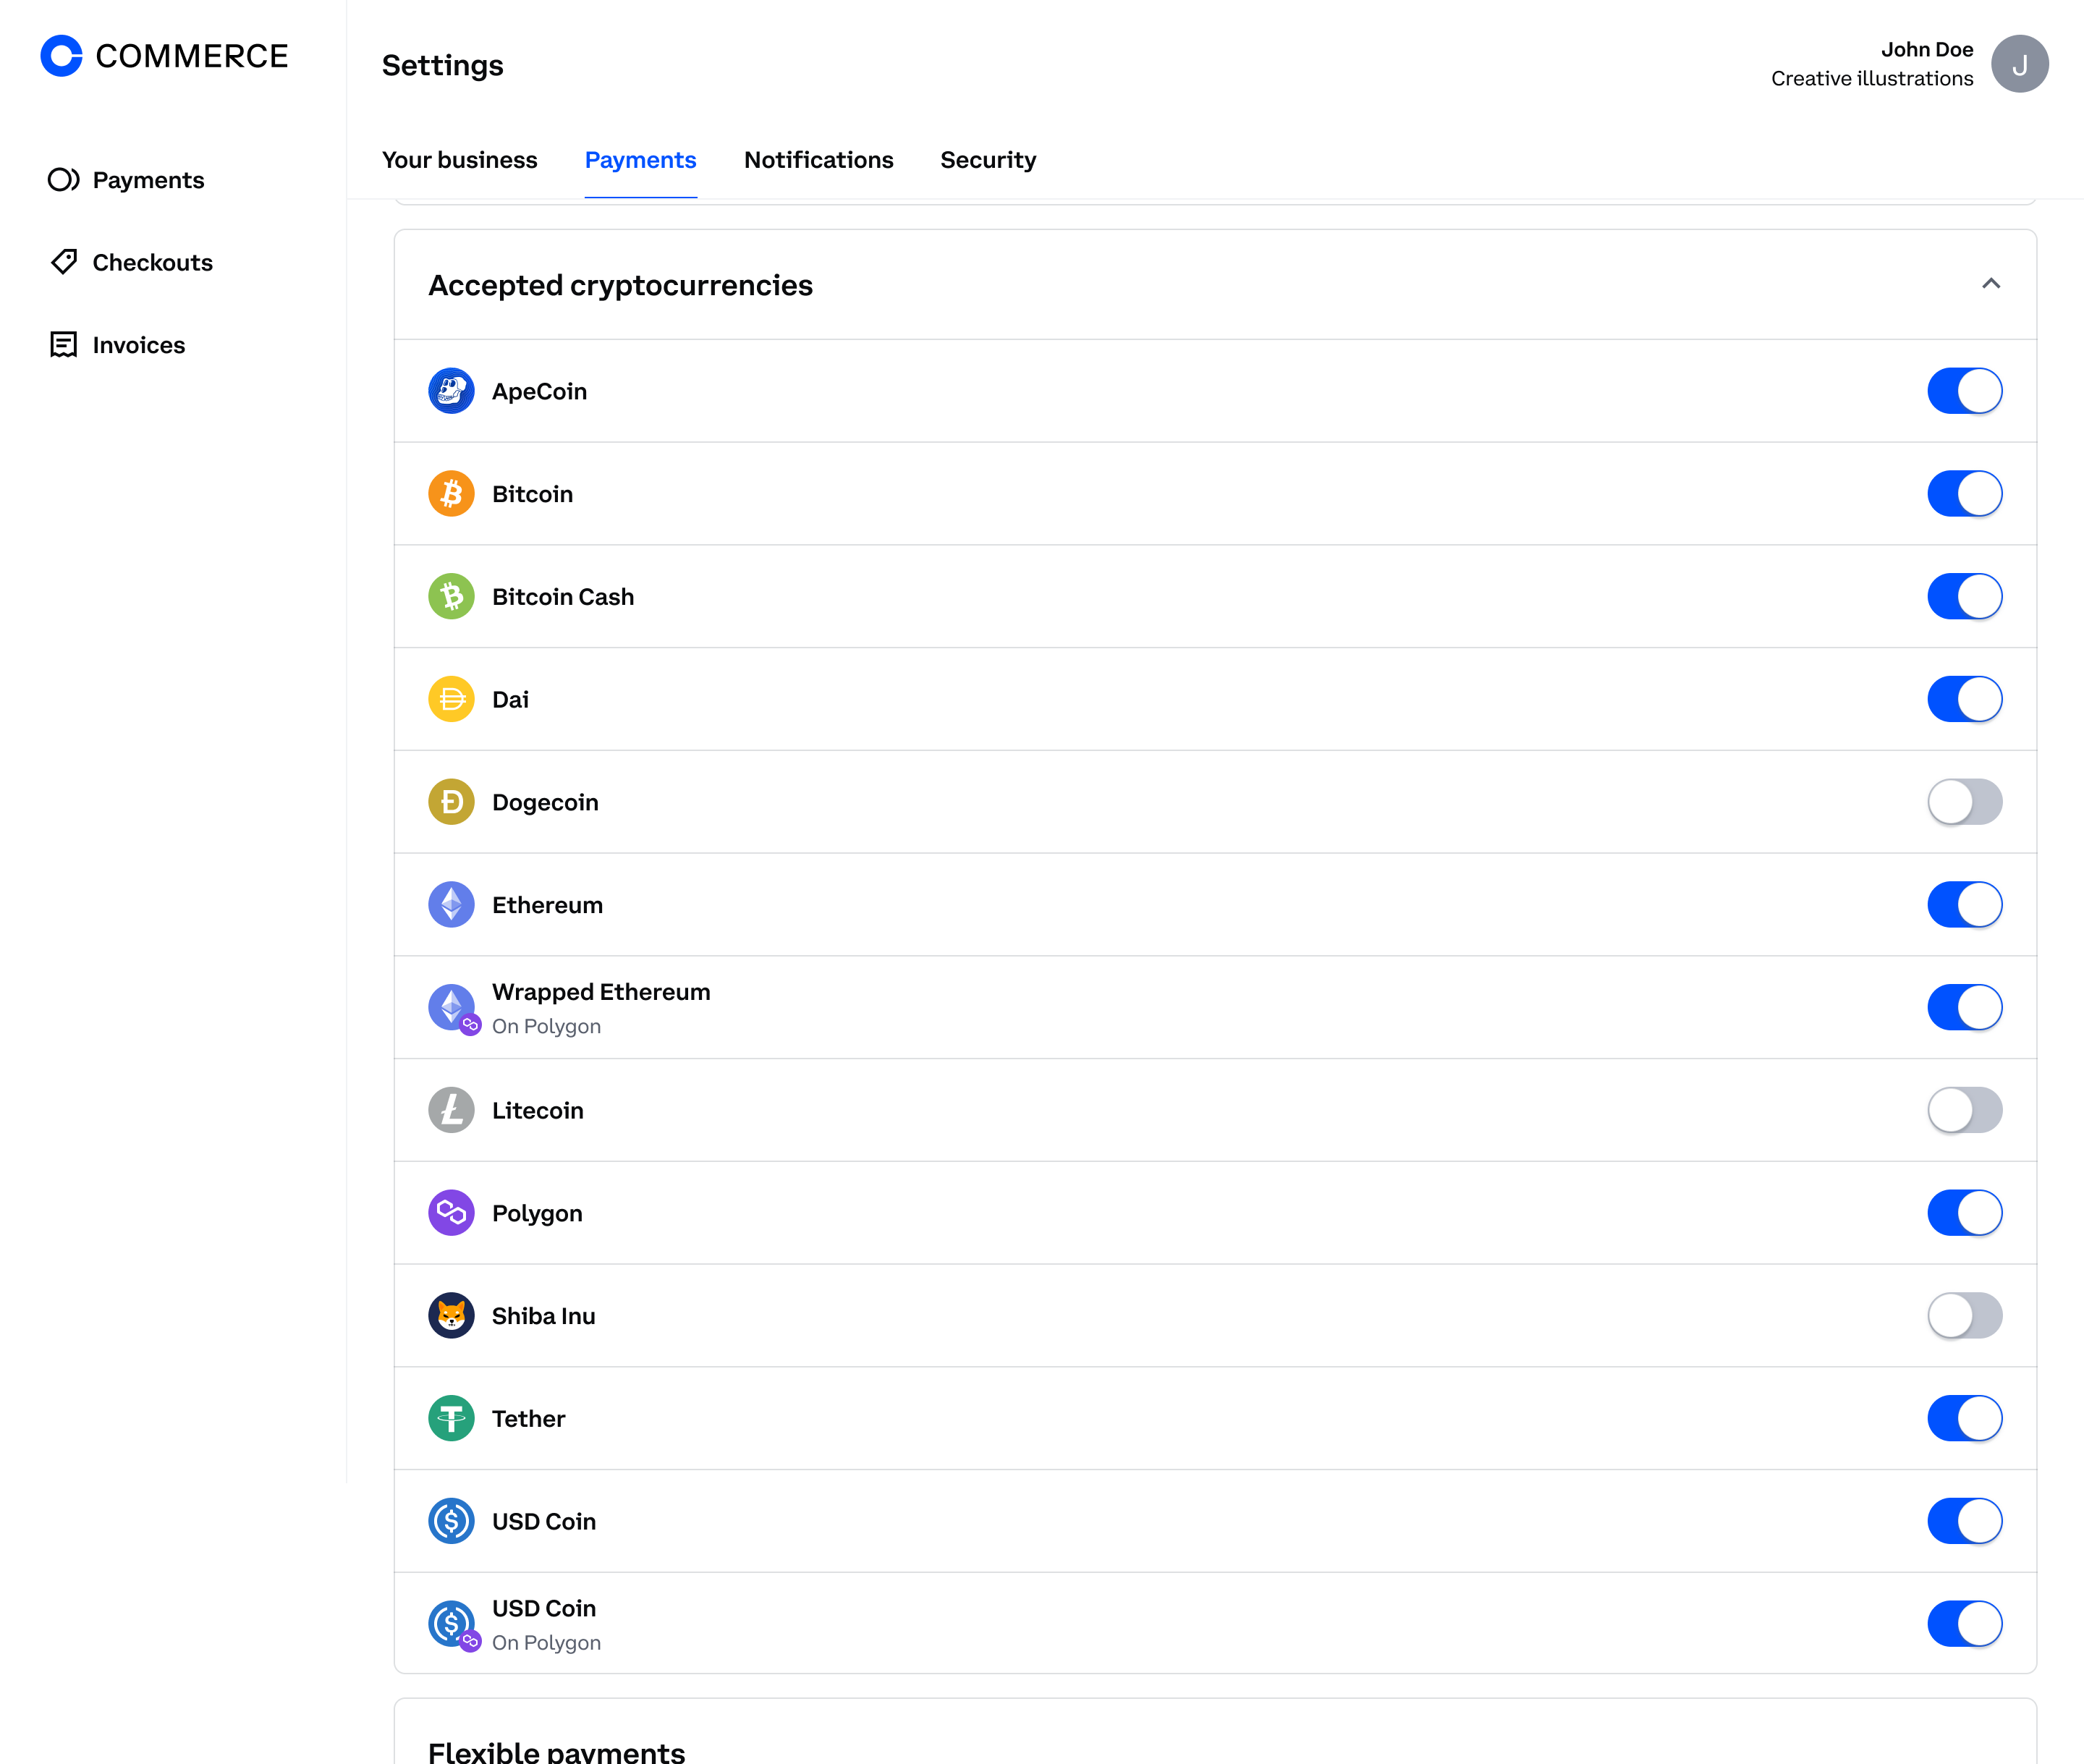 Image shows the Payments tab from the Settings page of the Merchant dashboard. There are rows of accepted cryptocurrencies with toggles in each row that allow each network to be toggled on or off, indicating if payments are accepted on each network.